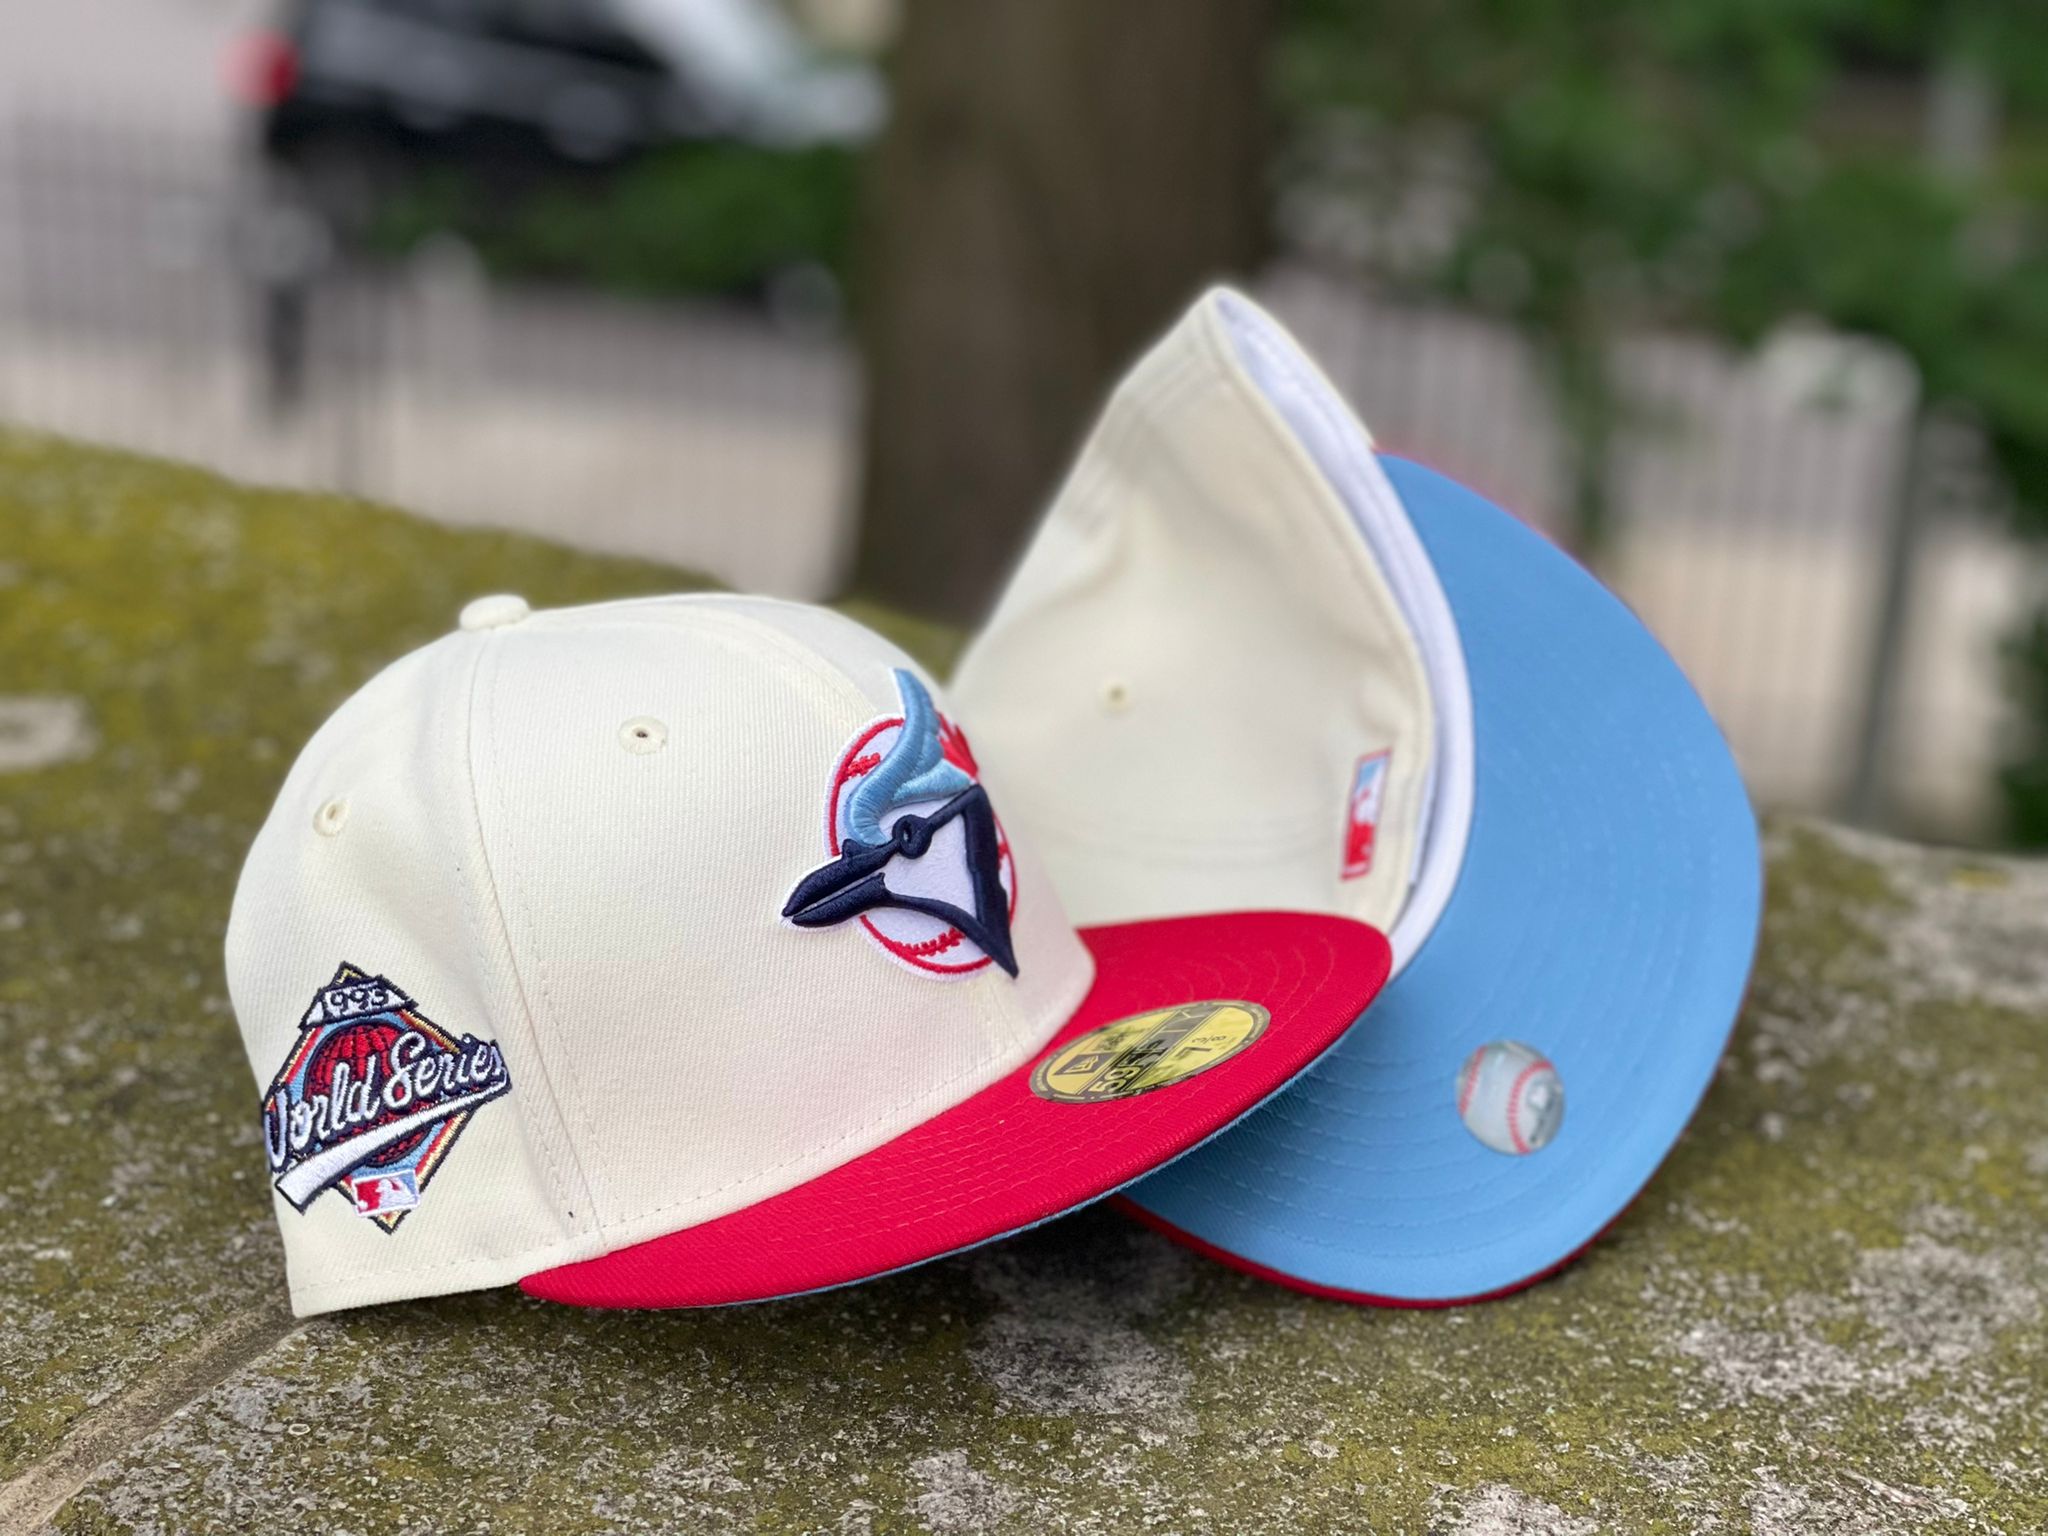 New Era Toronto Blue Jays World Series 1993 Sky Blue Throwback Edition  59Fifty Fitted Cap